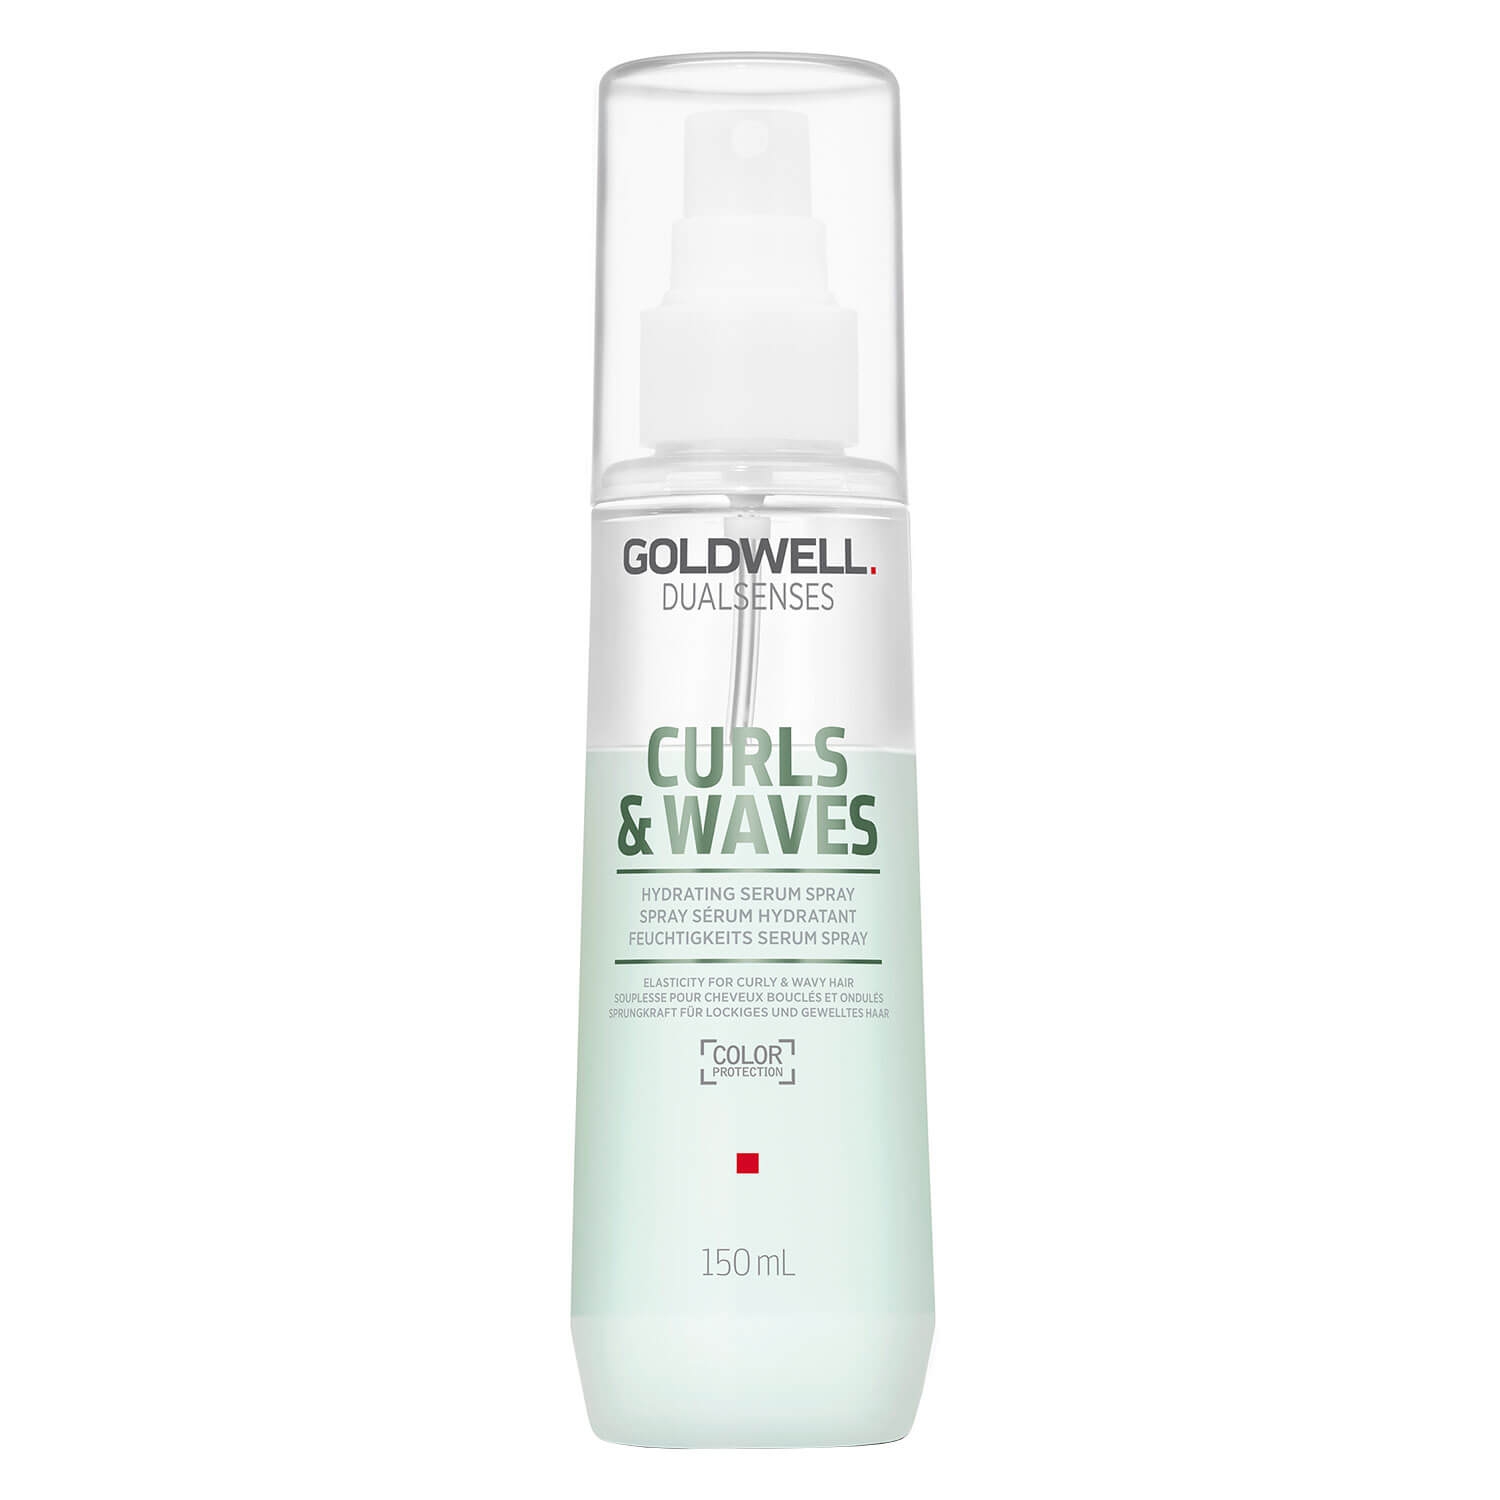 Product image from Dualsenses Curls & Waves - Hydrating Serum Spray